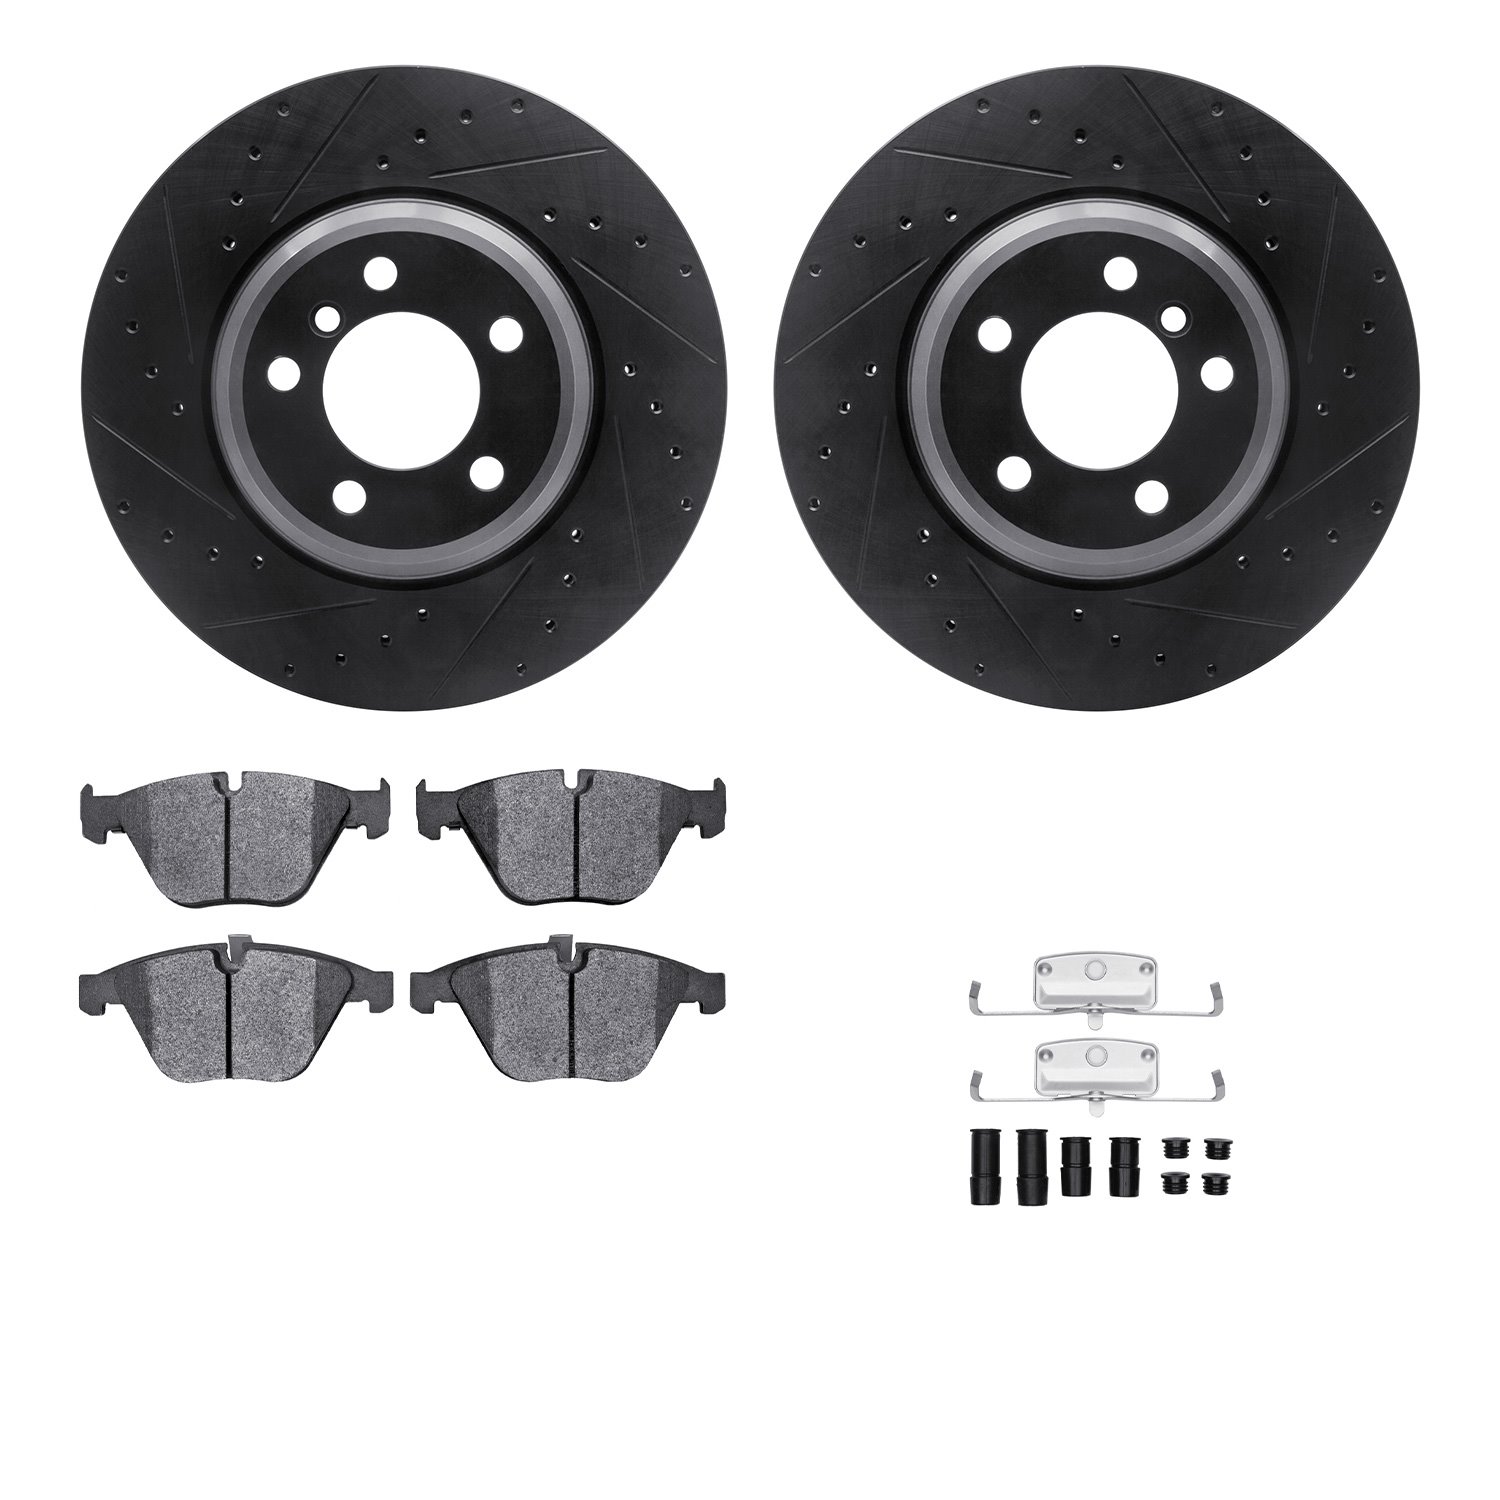 8312-31067 Drilled/Slotted Brake Rotors with 3000-Series Ceramic Brake Pads Kit & Hardware [Black], 2002-2008 BMW, Position: Fro